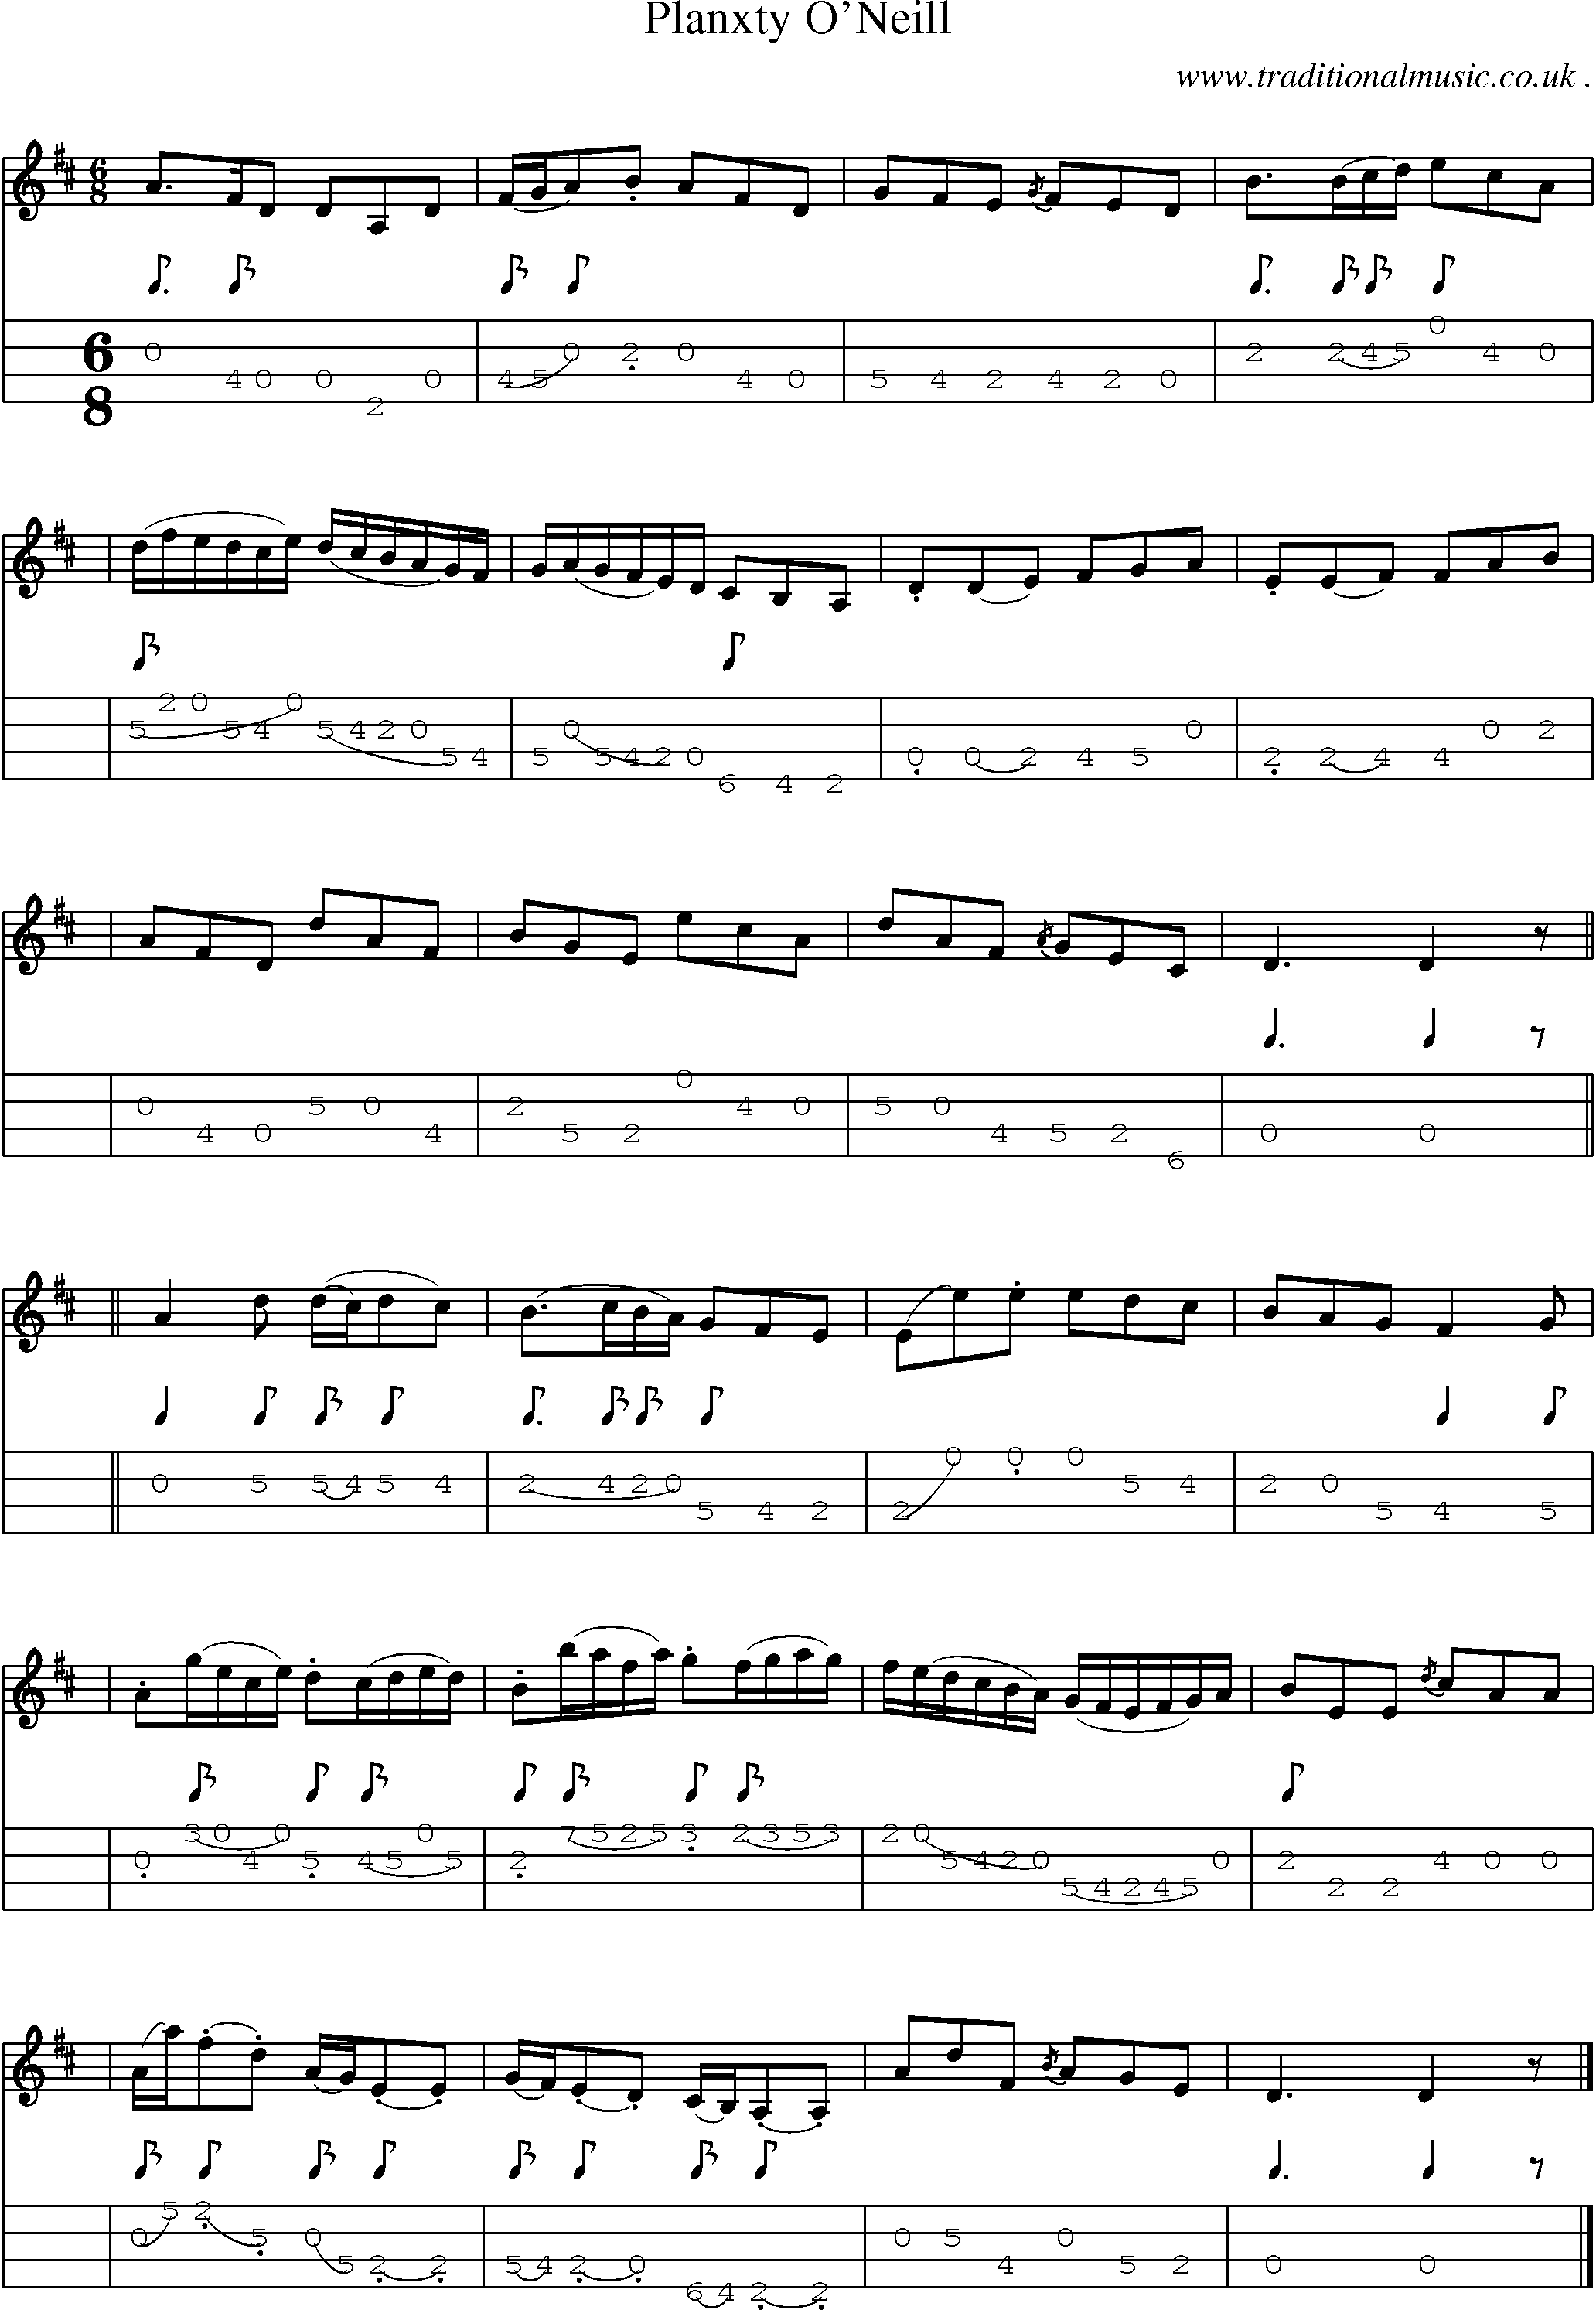 Sheet-music  score, Chords and Mandolin Tabs for Planxty Oneill